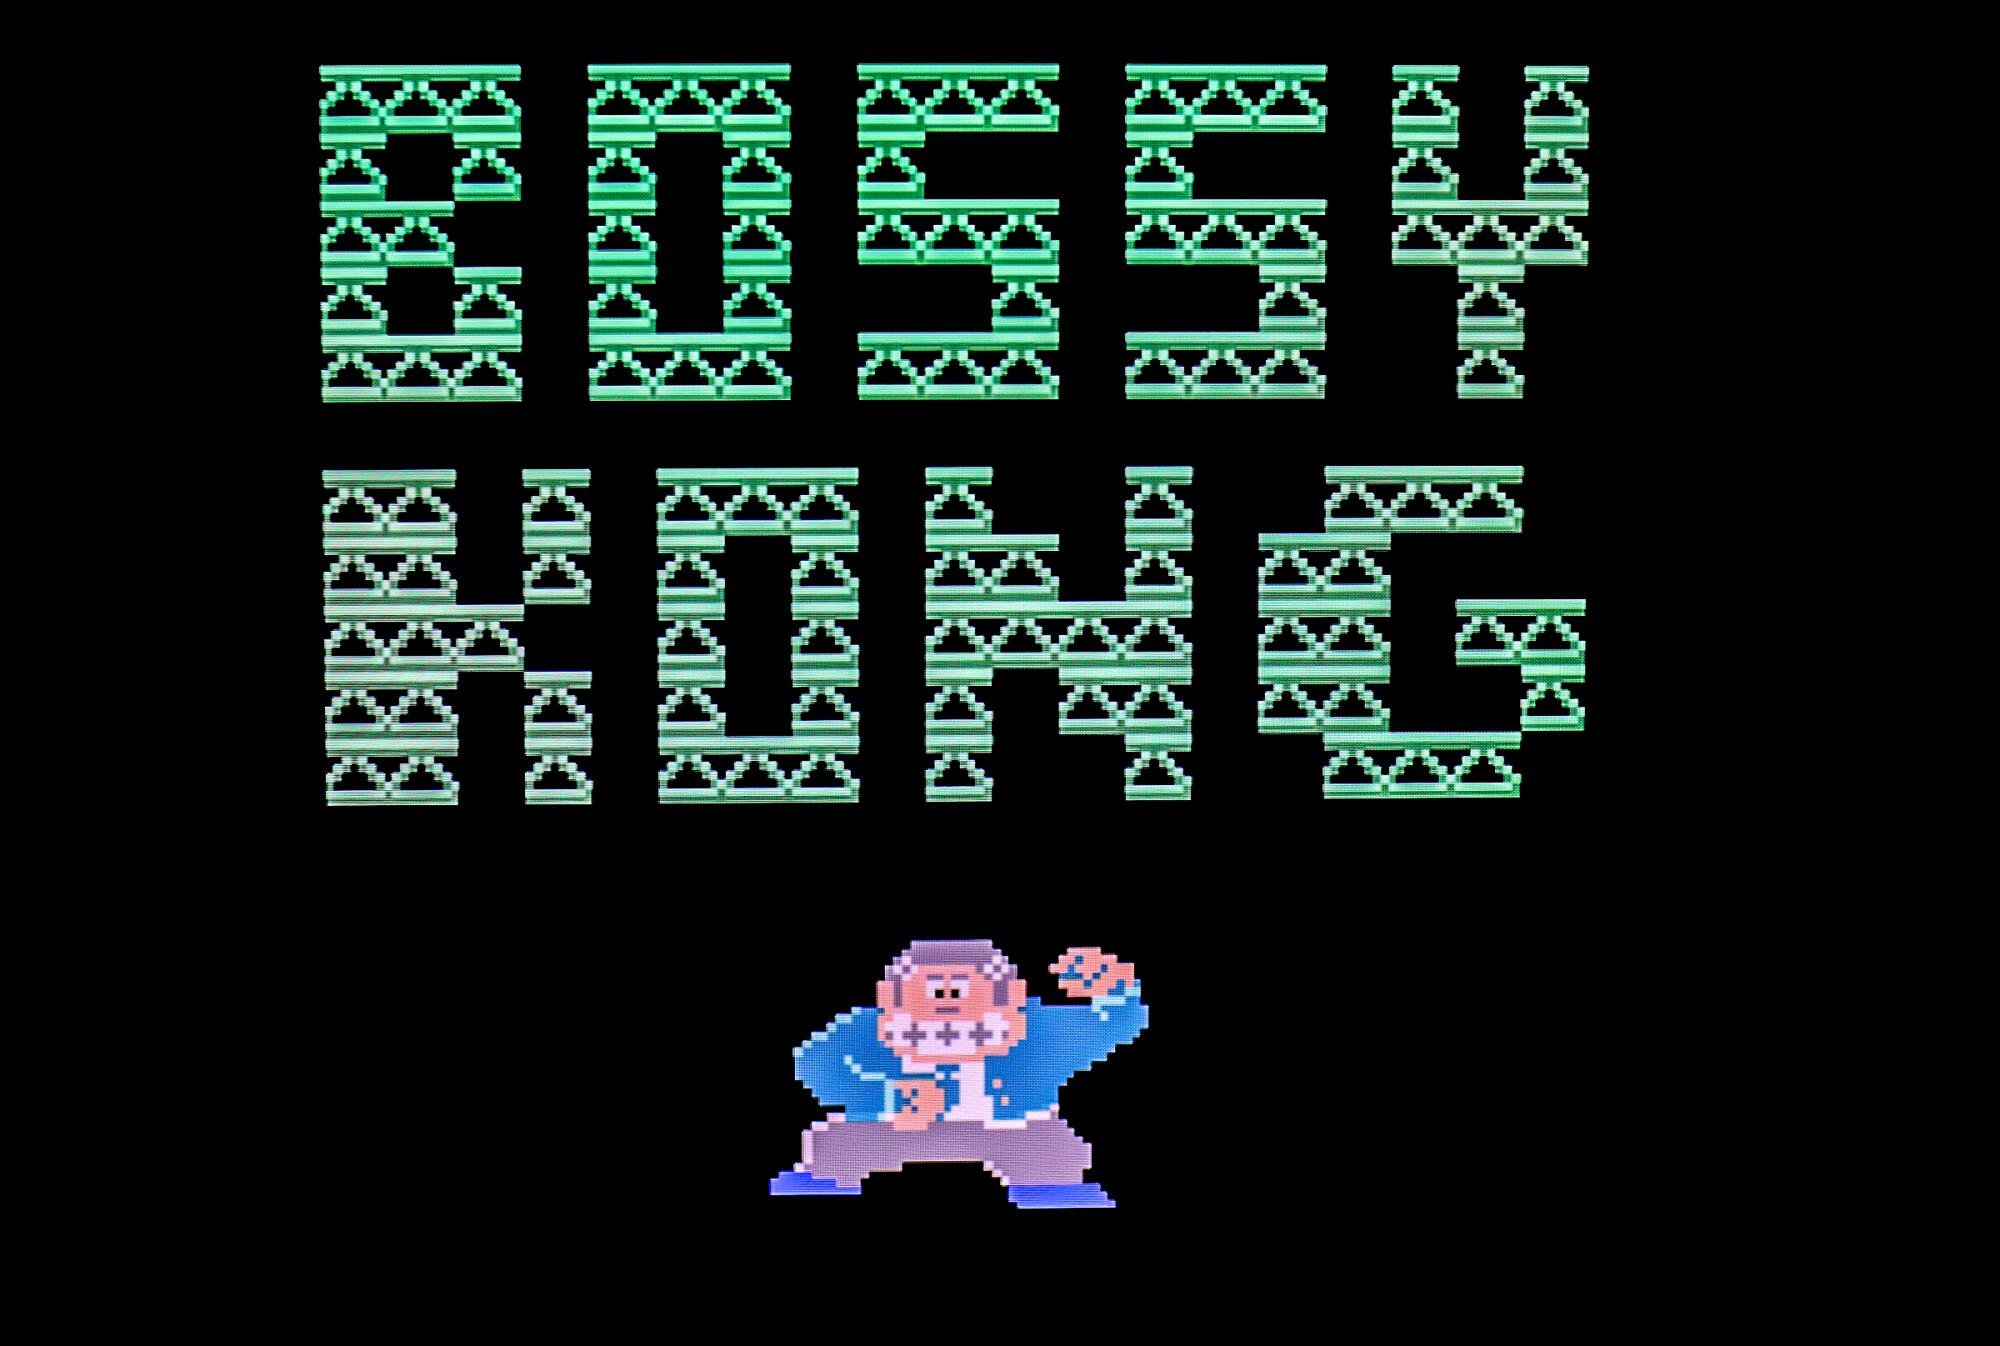 The title screen for "Bossy Kong," presented in all capital letters, and a small illustration of a monkey in a suit.